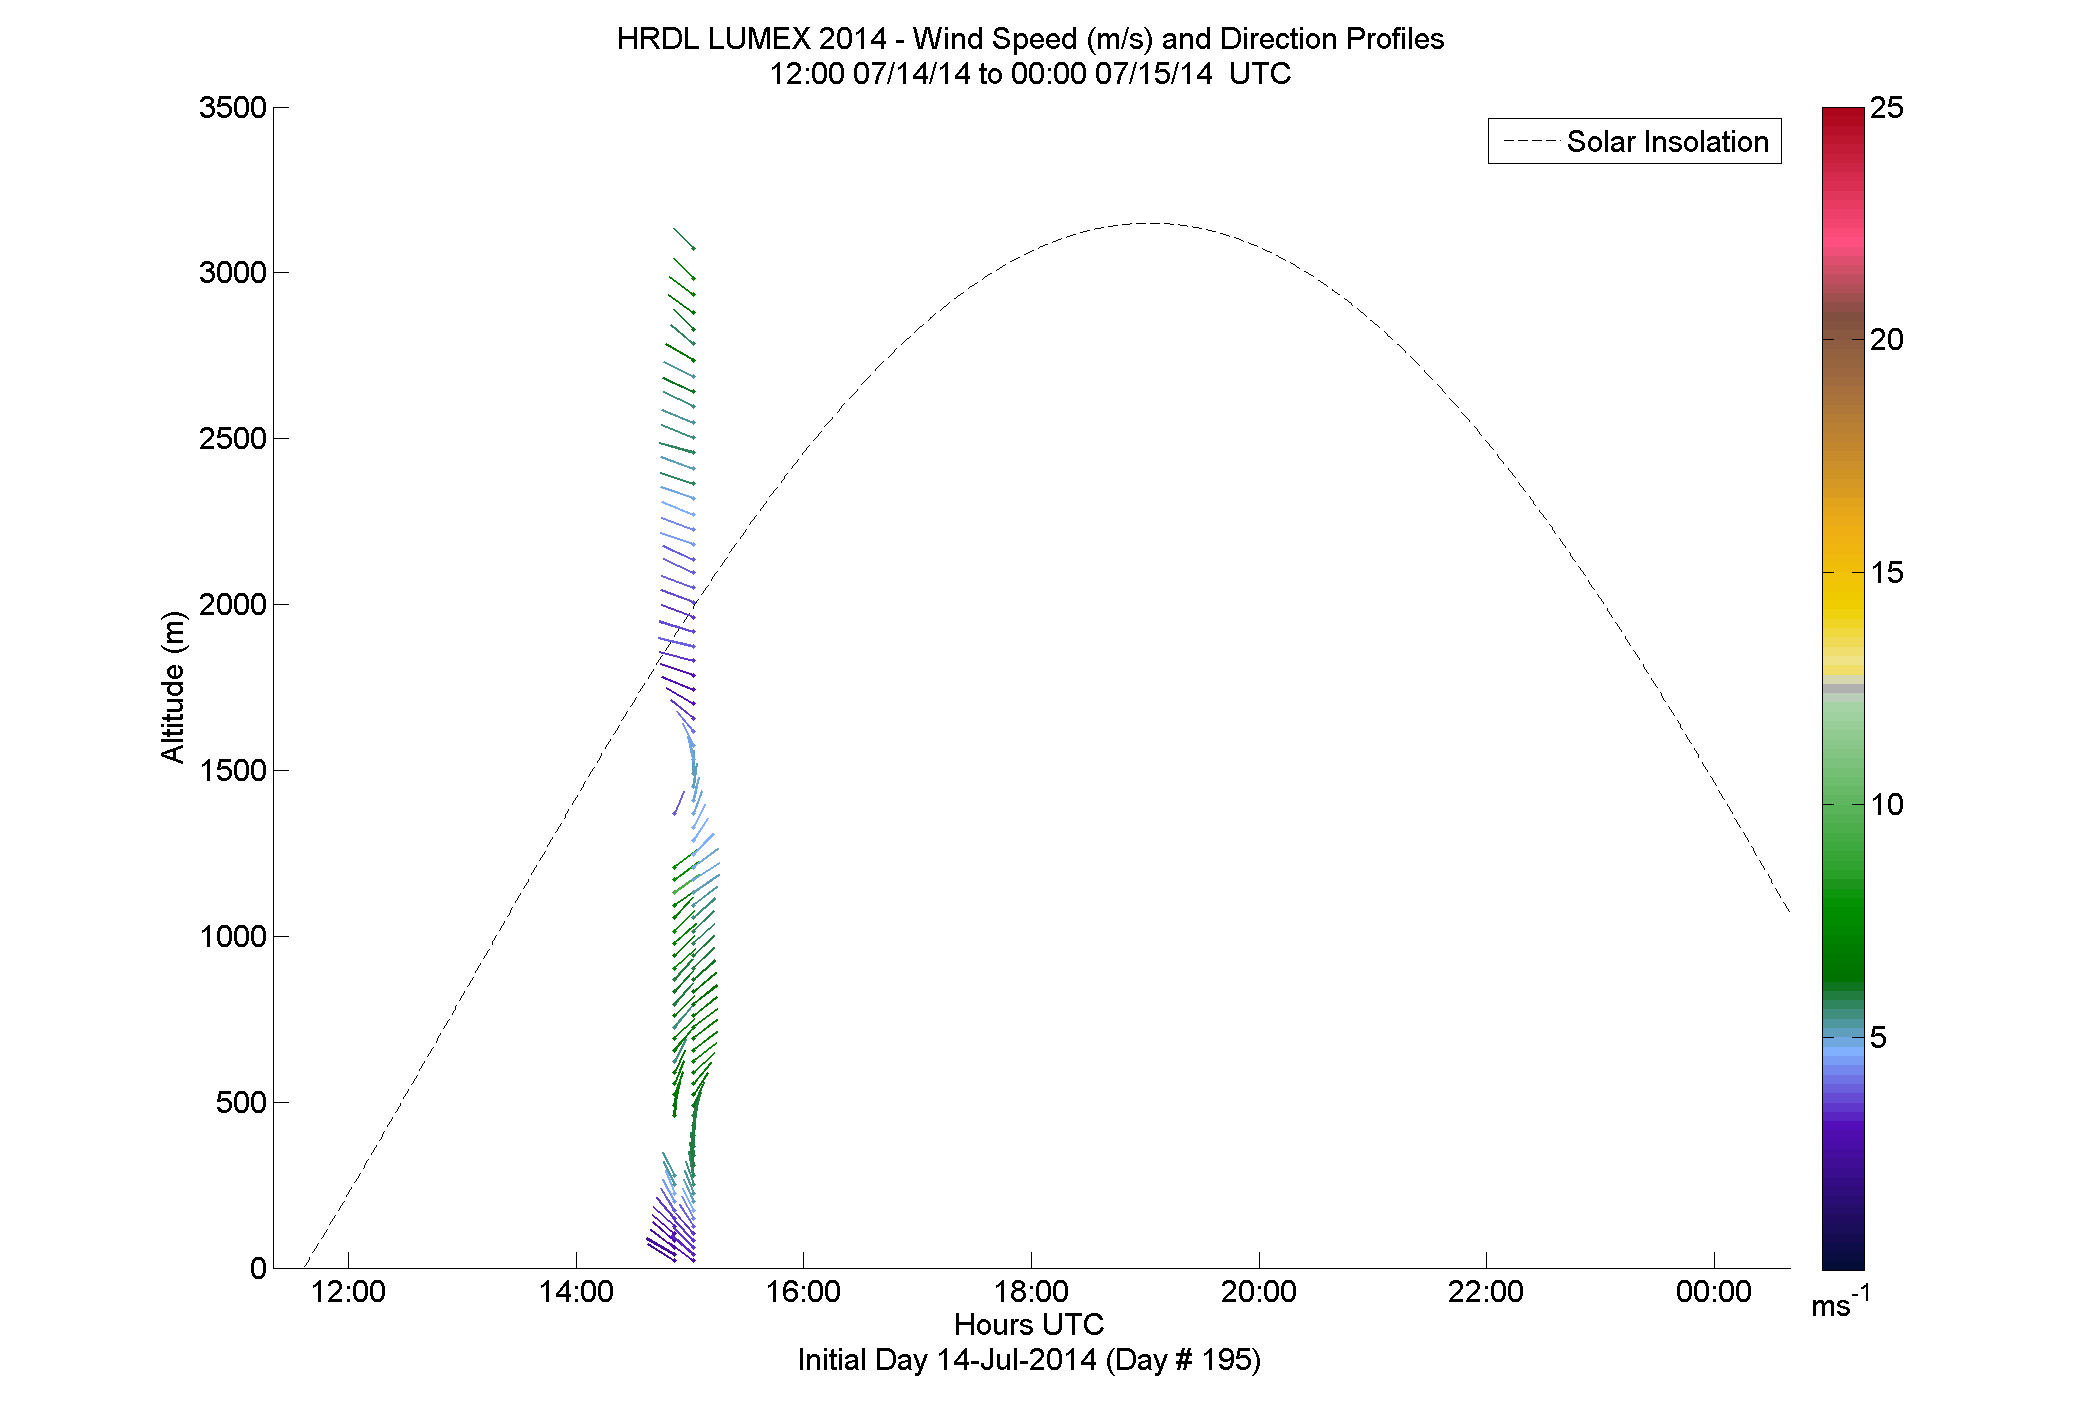 HRDL speed and direction profile - July 14 pm